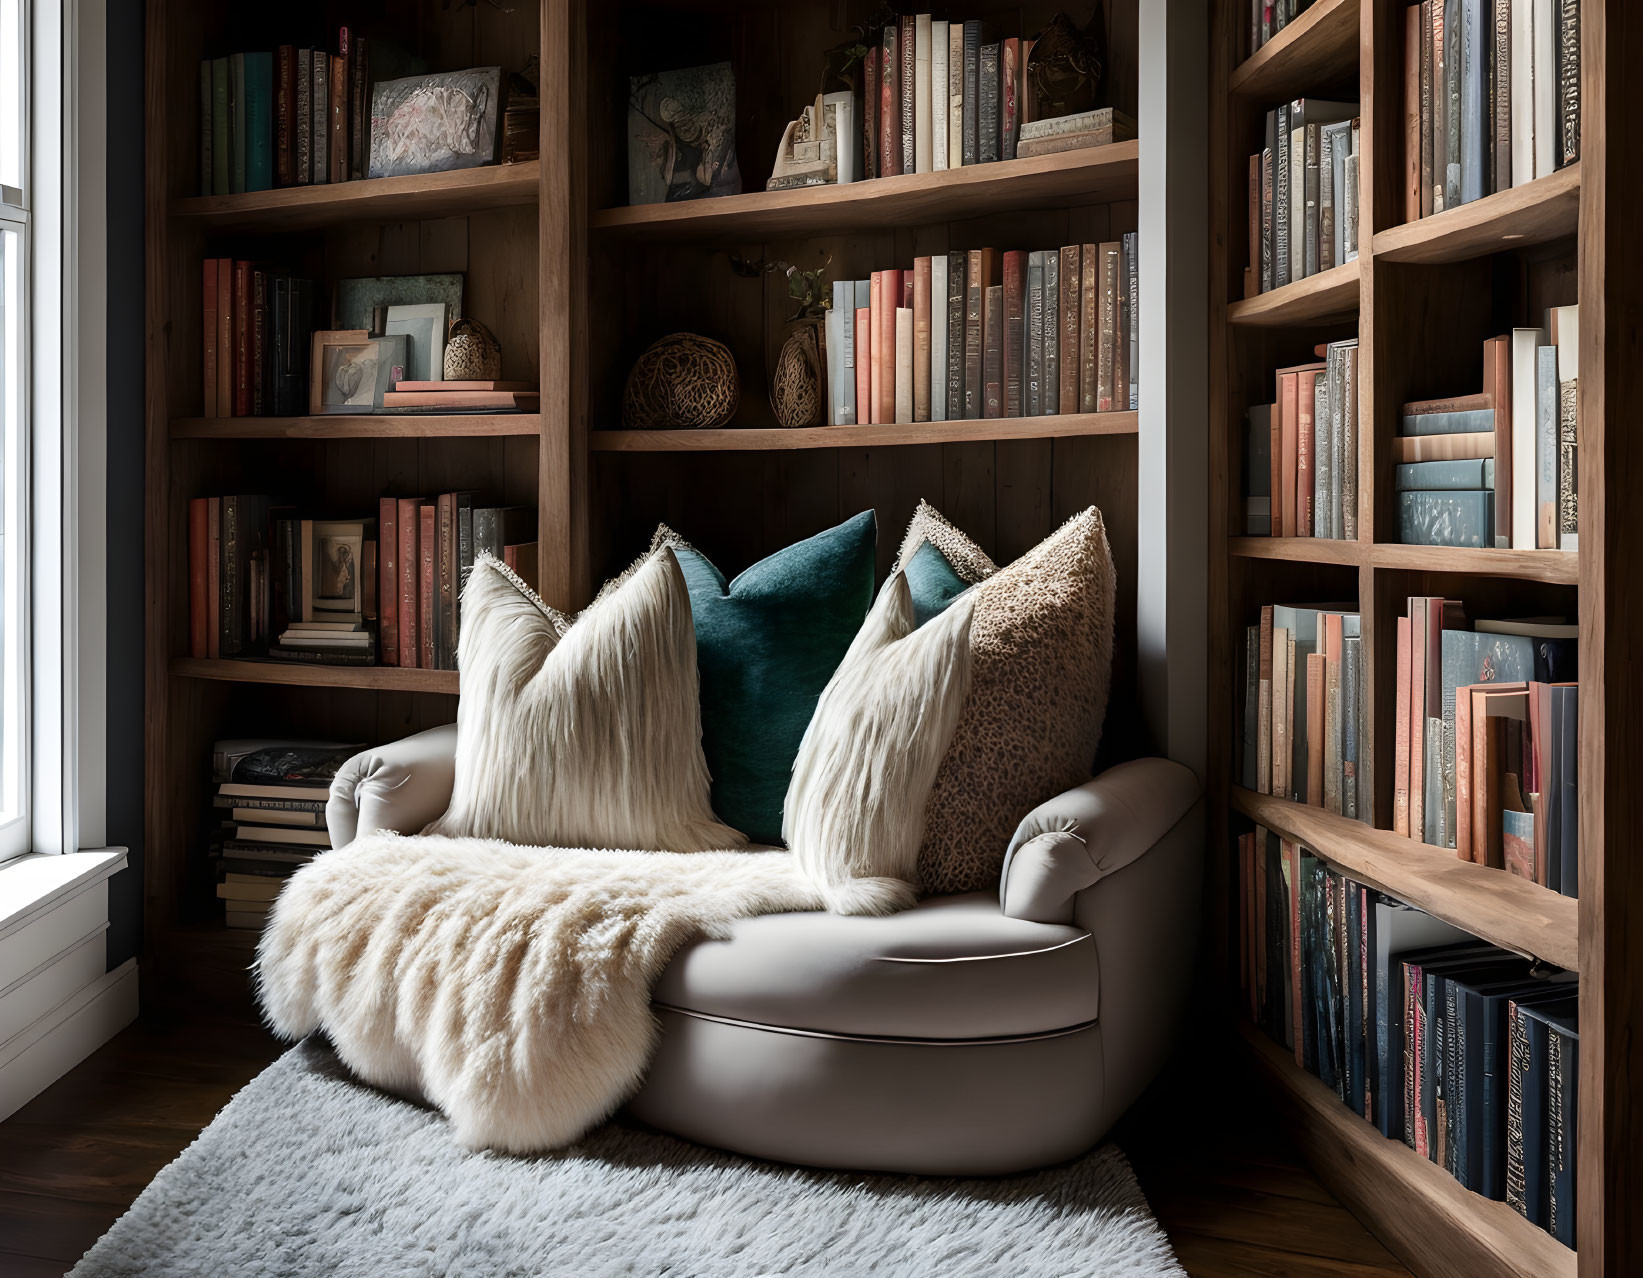 Inviting reading nook with plush armchair, faux fur throw, wooden bookshelves.